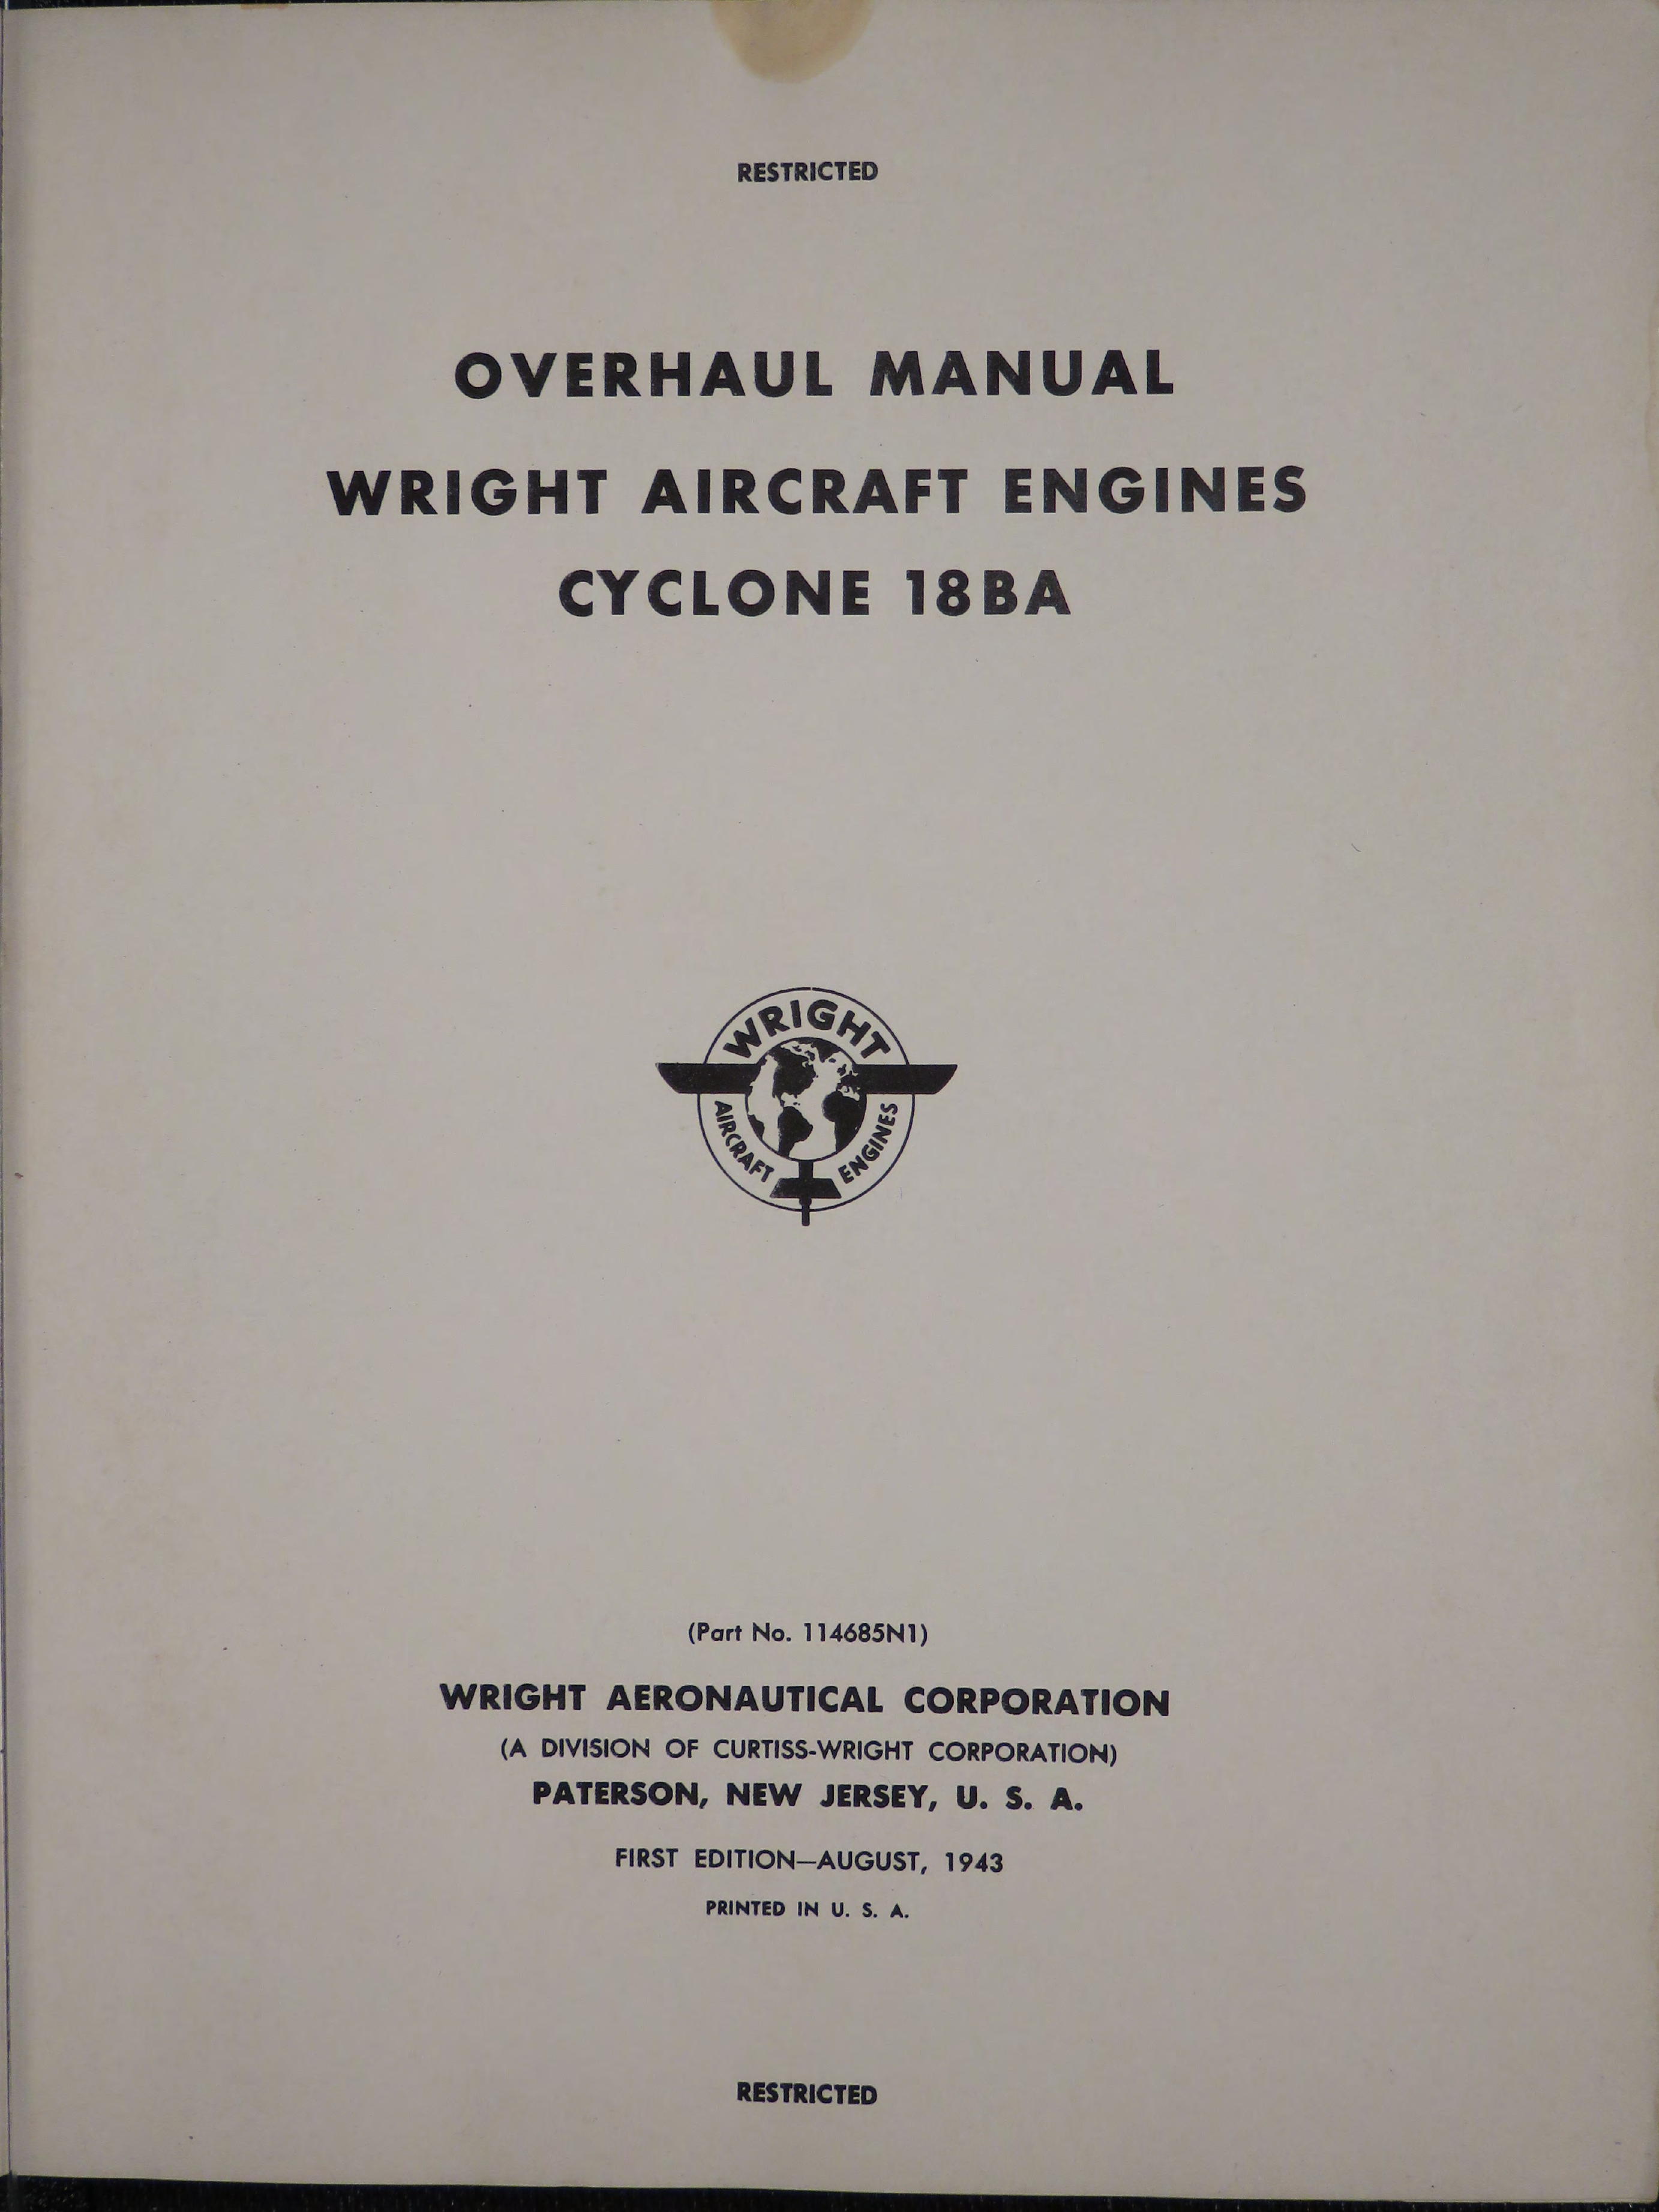 Sample page 7 from AirCorps Library document: Overhaul Manual for Wright Aircraft Engines - Cyclone 18BA